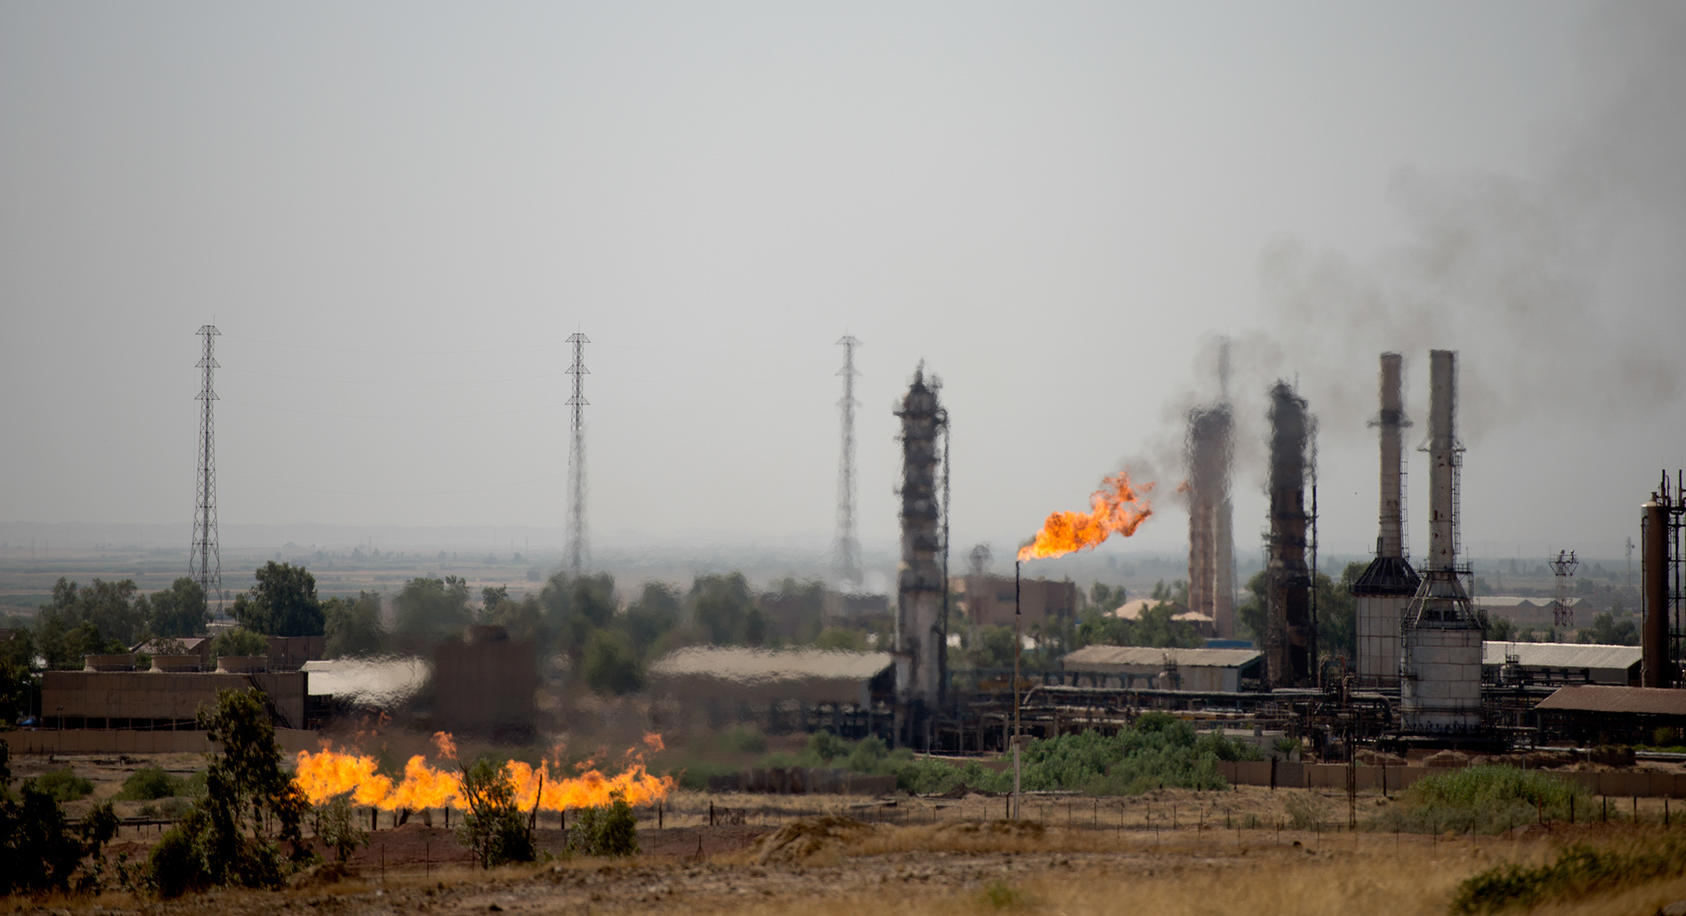 An oil field in the Kirkuk region of Iraq, which supplies much of the wealth for the autonomous region of Kurdistan, Sept. 8, 2014. In a far-reaching deal with the potential to unite Iraq in the face of a Sunni insurgency, the government of Prime Minister Haider al-Abadi agreed on Dec. 2 to a long-term pact with the Kurds over how to divide the country’s oil wealth and cooperate on fighting Islamic State extremists. (Andrea Bruce/The New York Times)